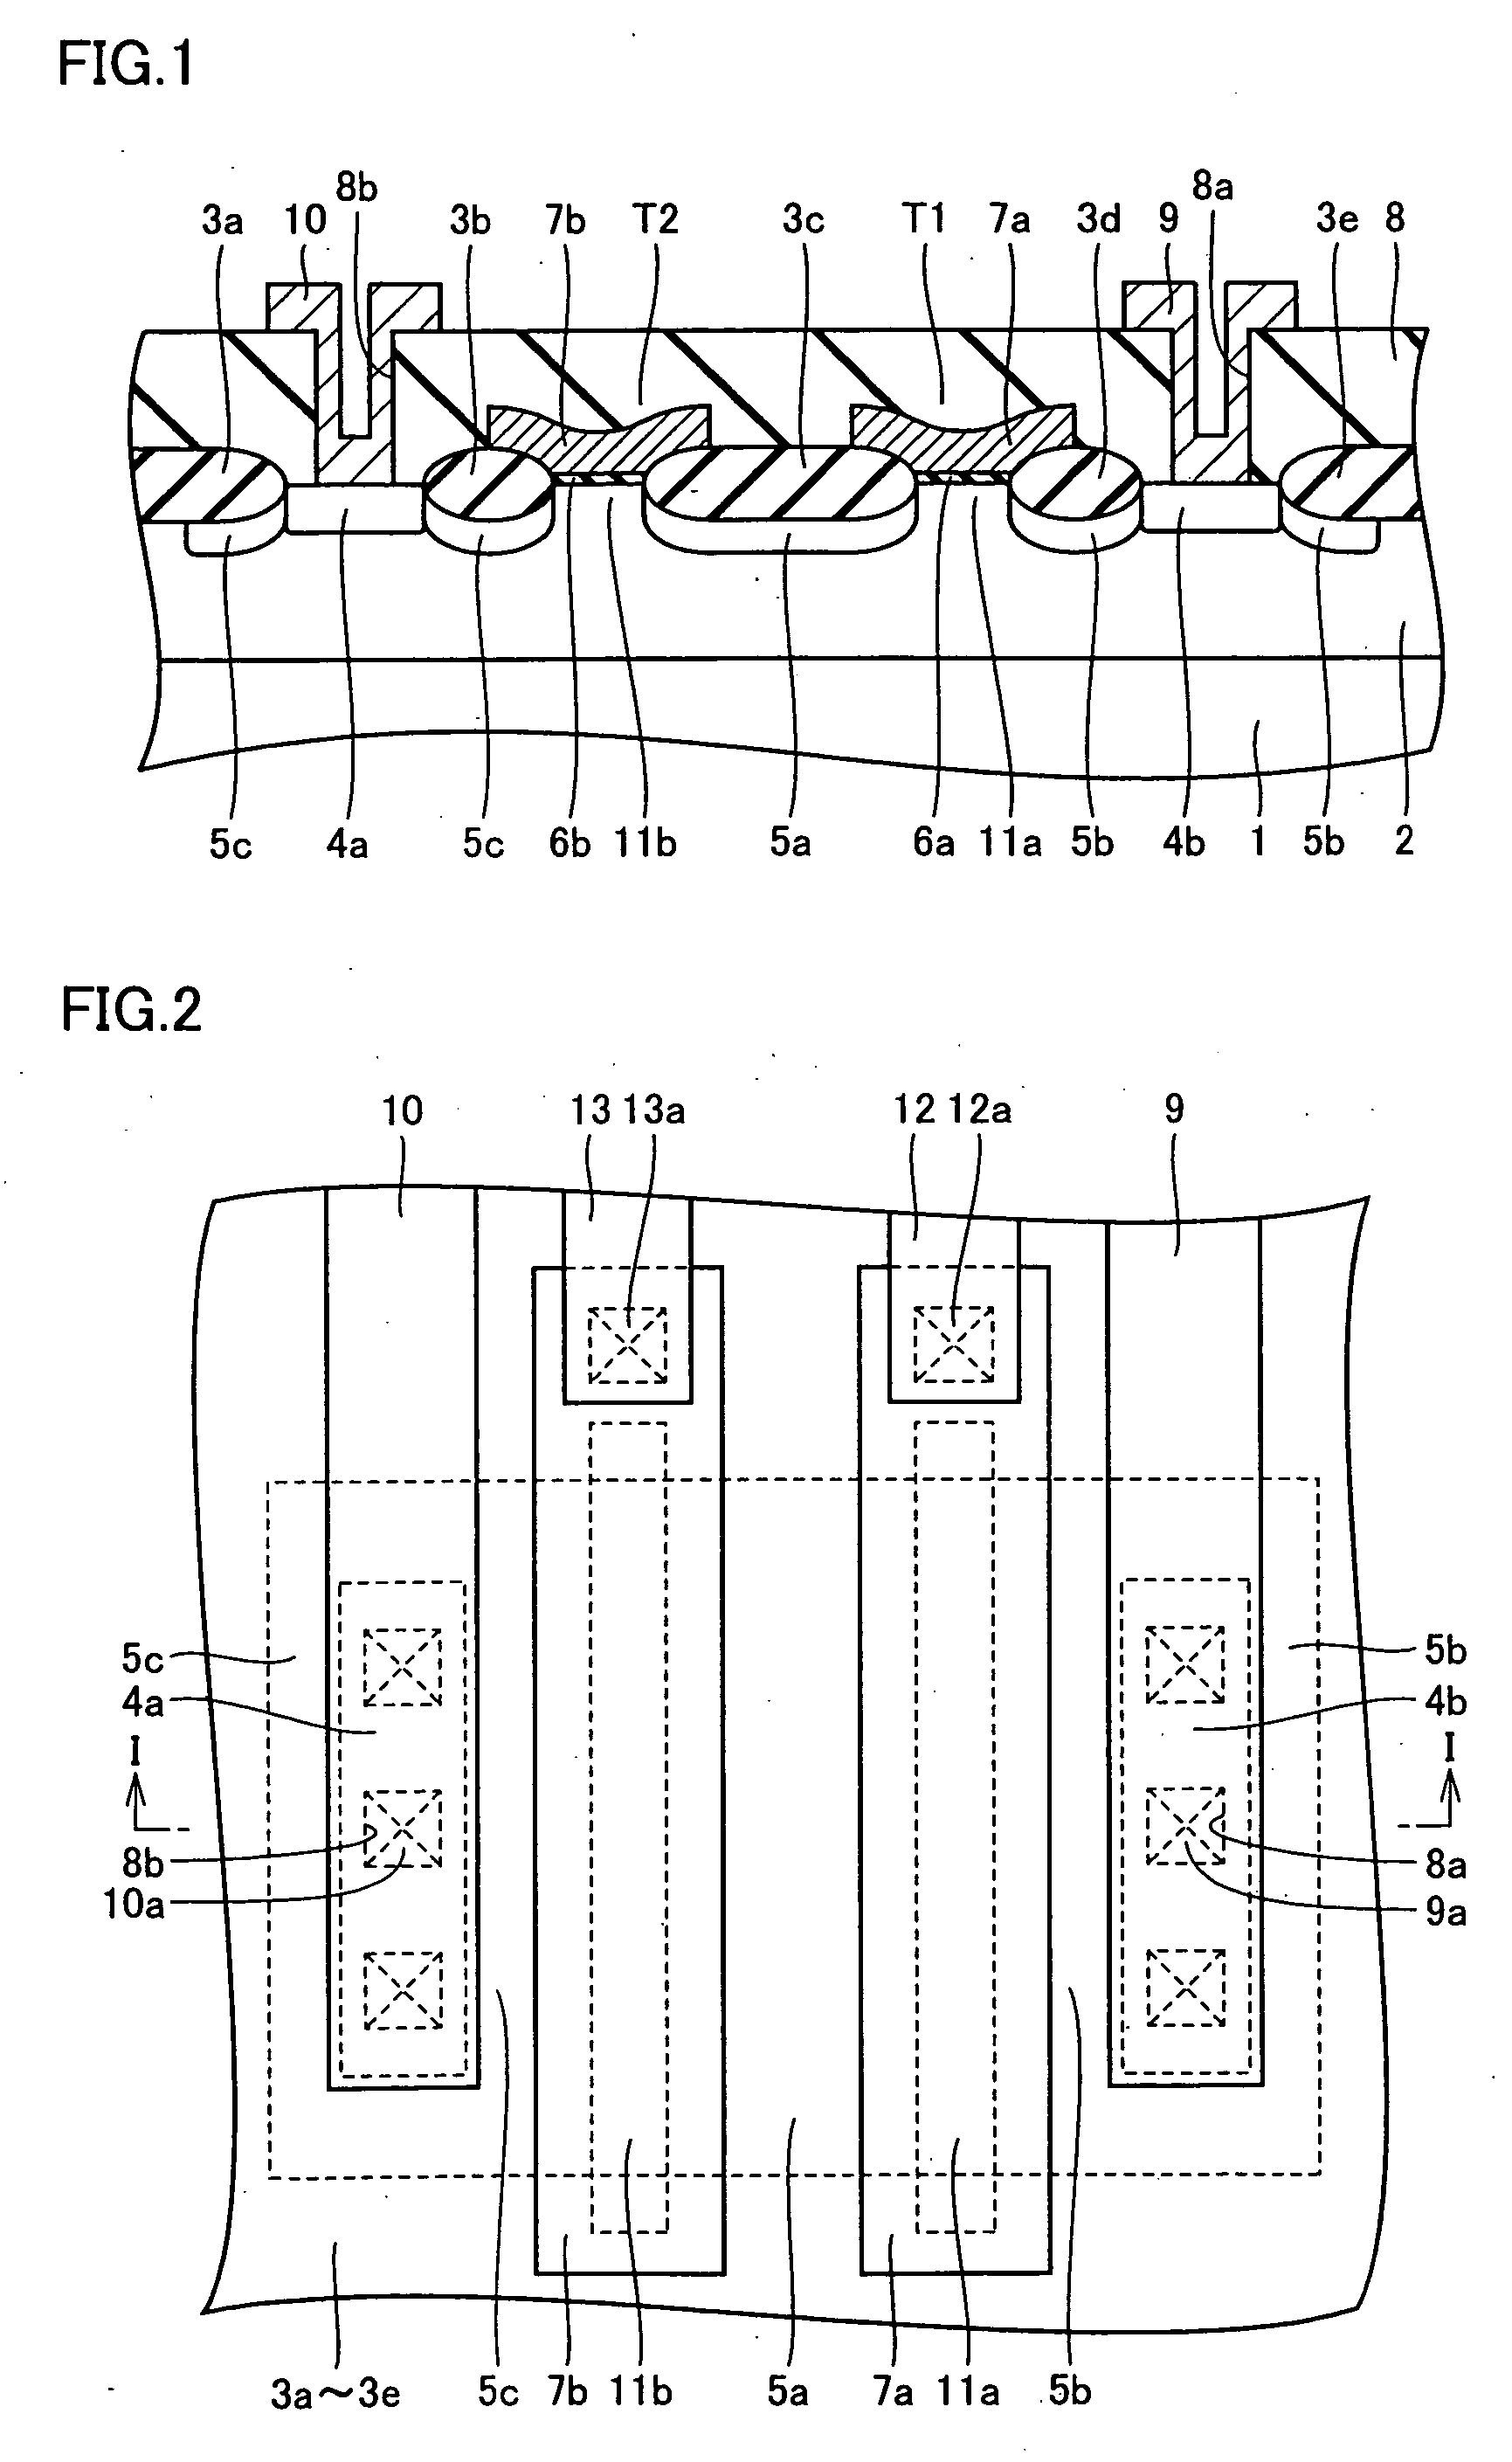 Semiconductor device including a high-breakdown voltage MOS transistor